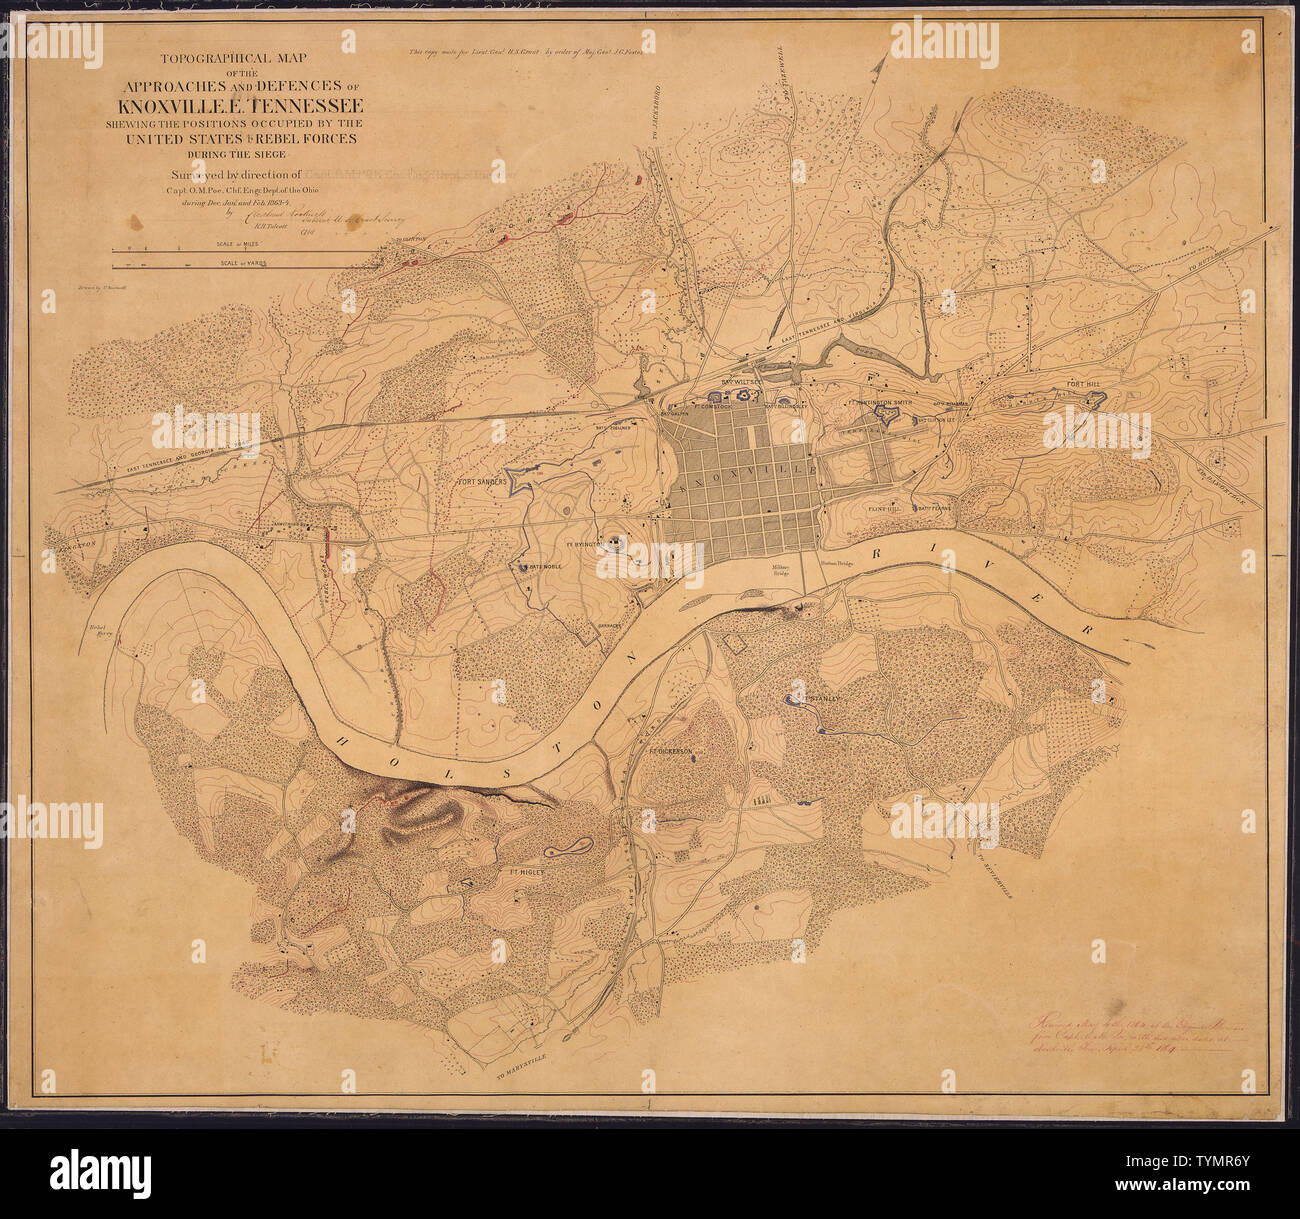 Topographical Map of the Approaches and Defenses of Knoxville, E. Tennessee, Shewing the Positions Occupied by the United States & Rebel Forces during the Siege. Surveyed by direction of Capt. O. M. Poe, Chf. Engr., Dept. of the Ohio, during Dec., Jan., and Feb., 1863-4, by [signed] Cleveland Rockwell, Sub. Asst., U.S. Coast Survey, [and] R. H. Talcott, Aid ... Drawn by C. Rockwell. Stock Photo